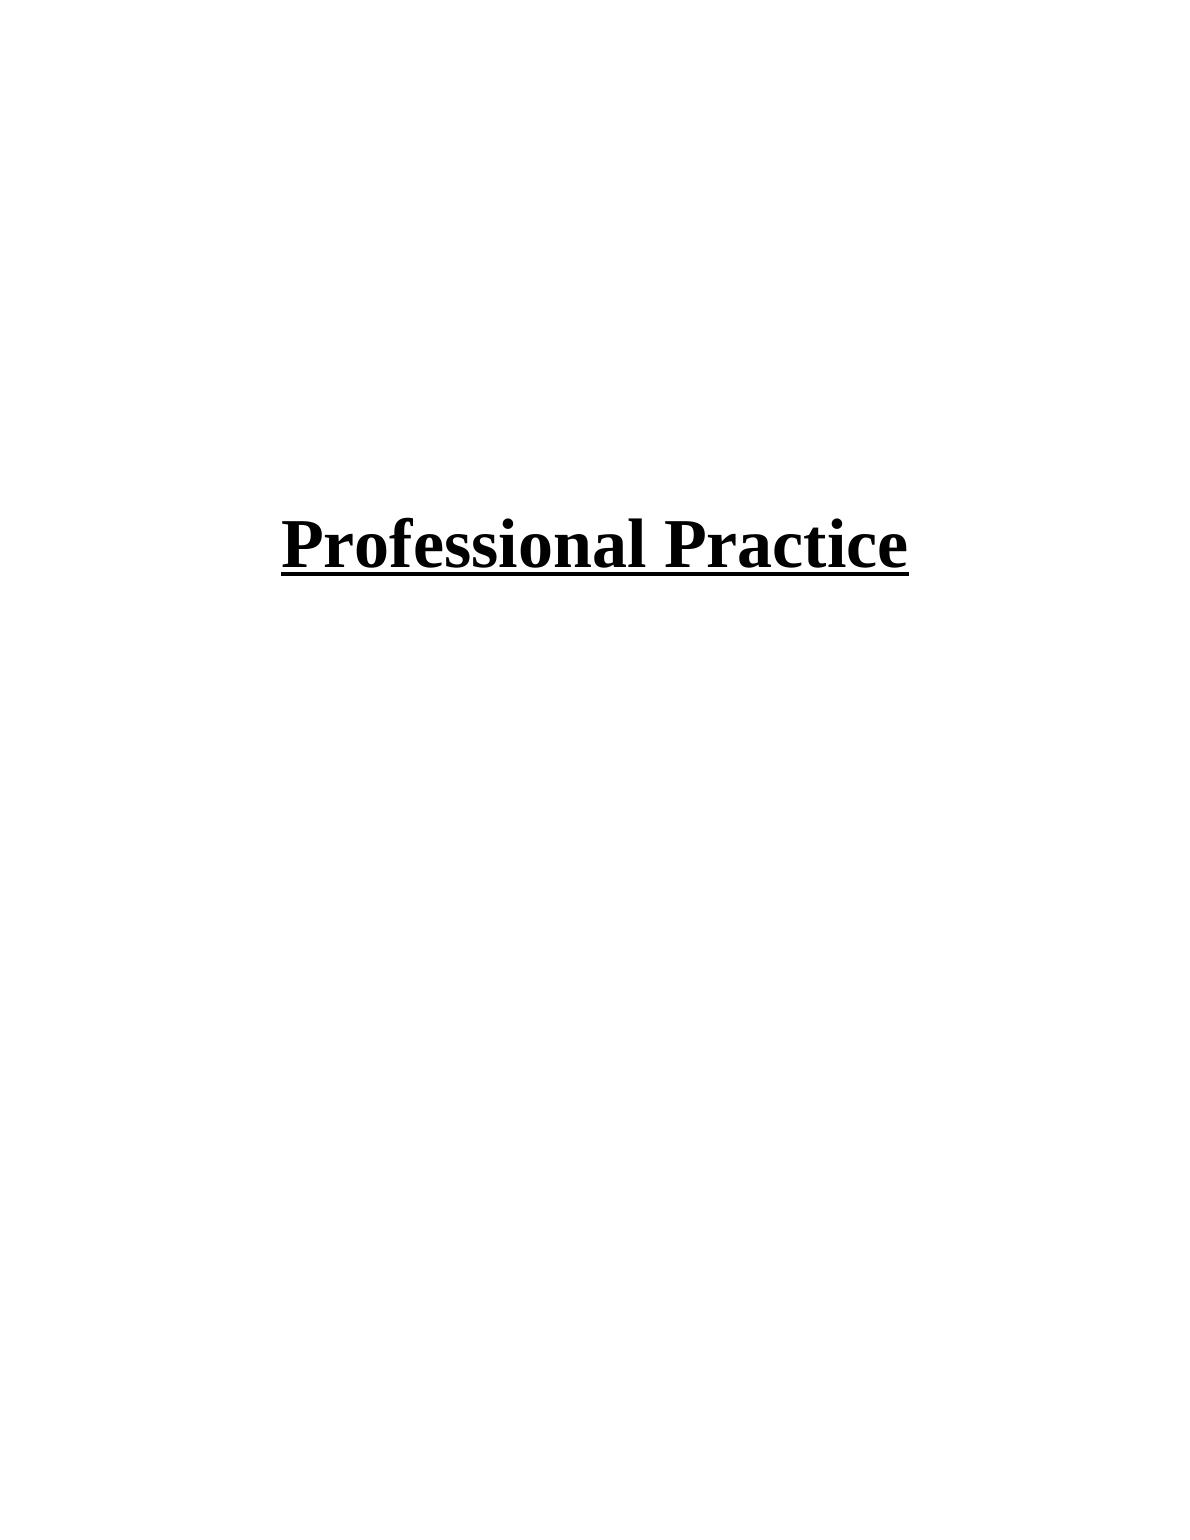 Professional Practice Assignment Solution_1